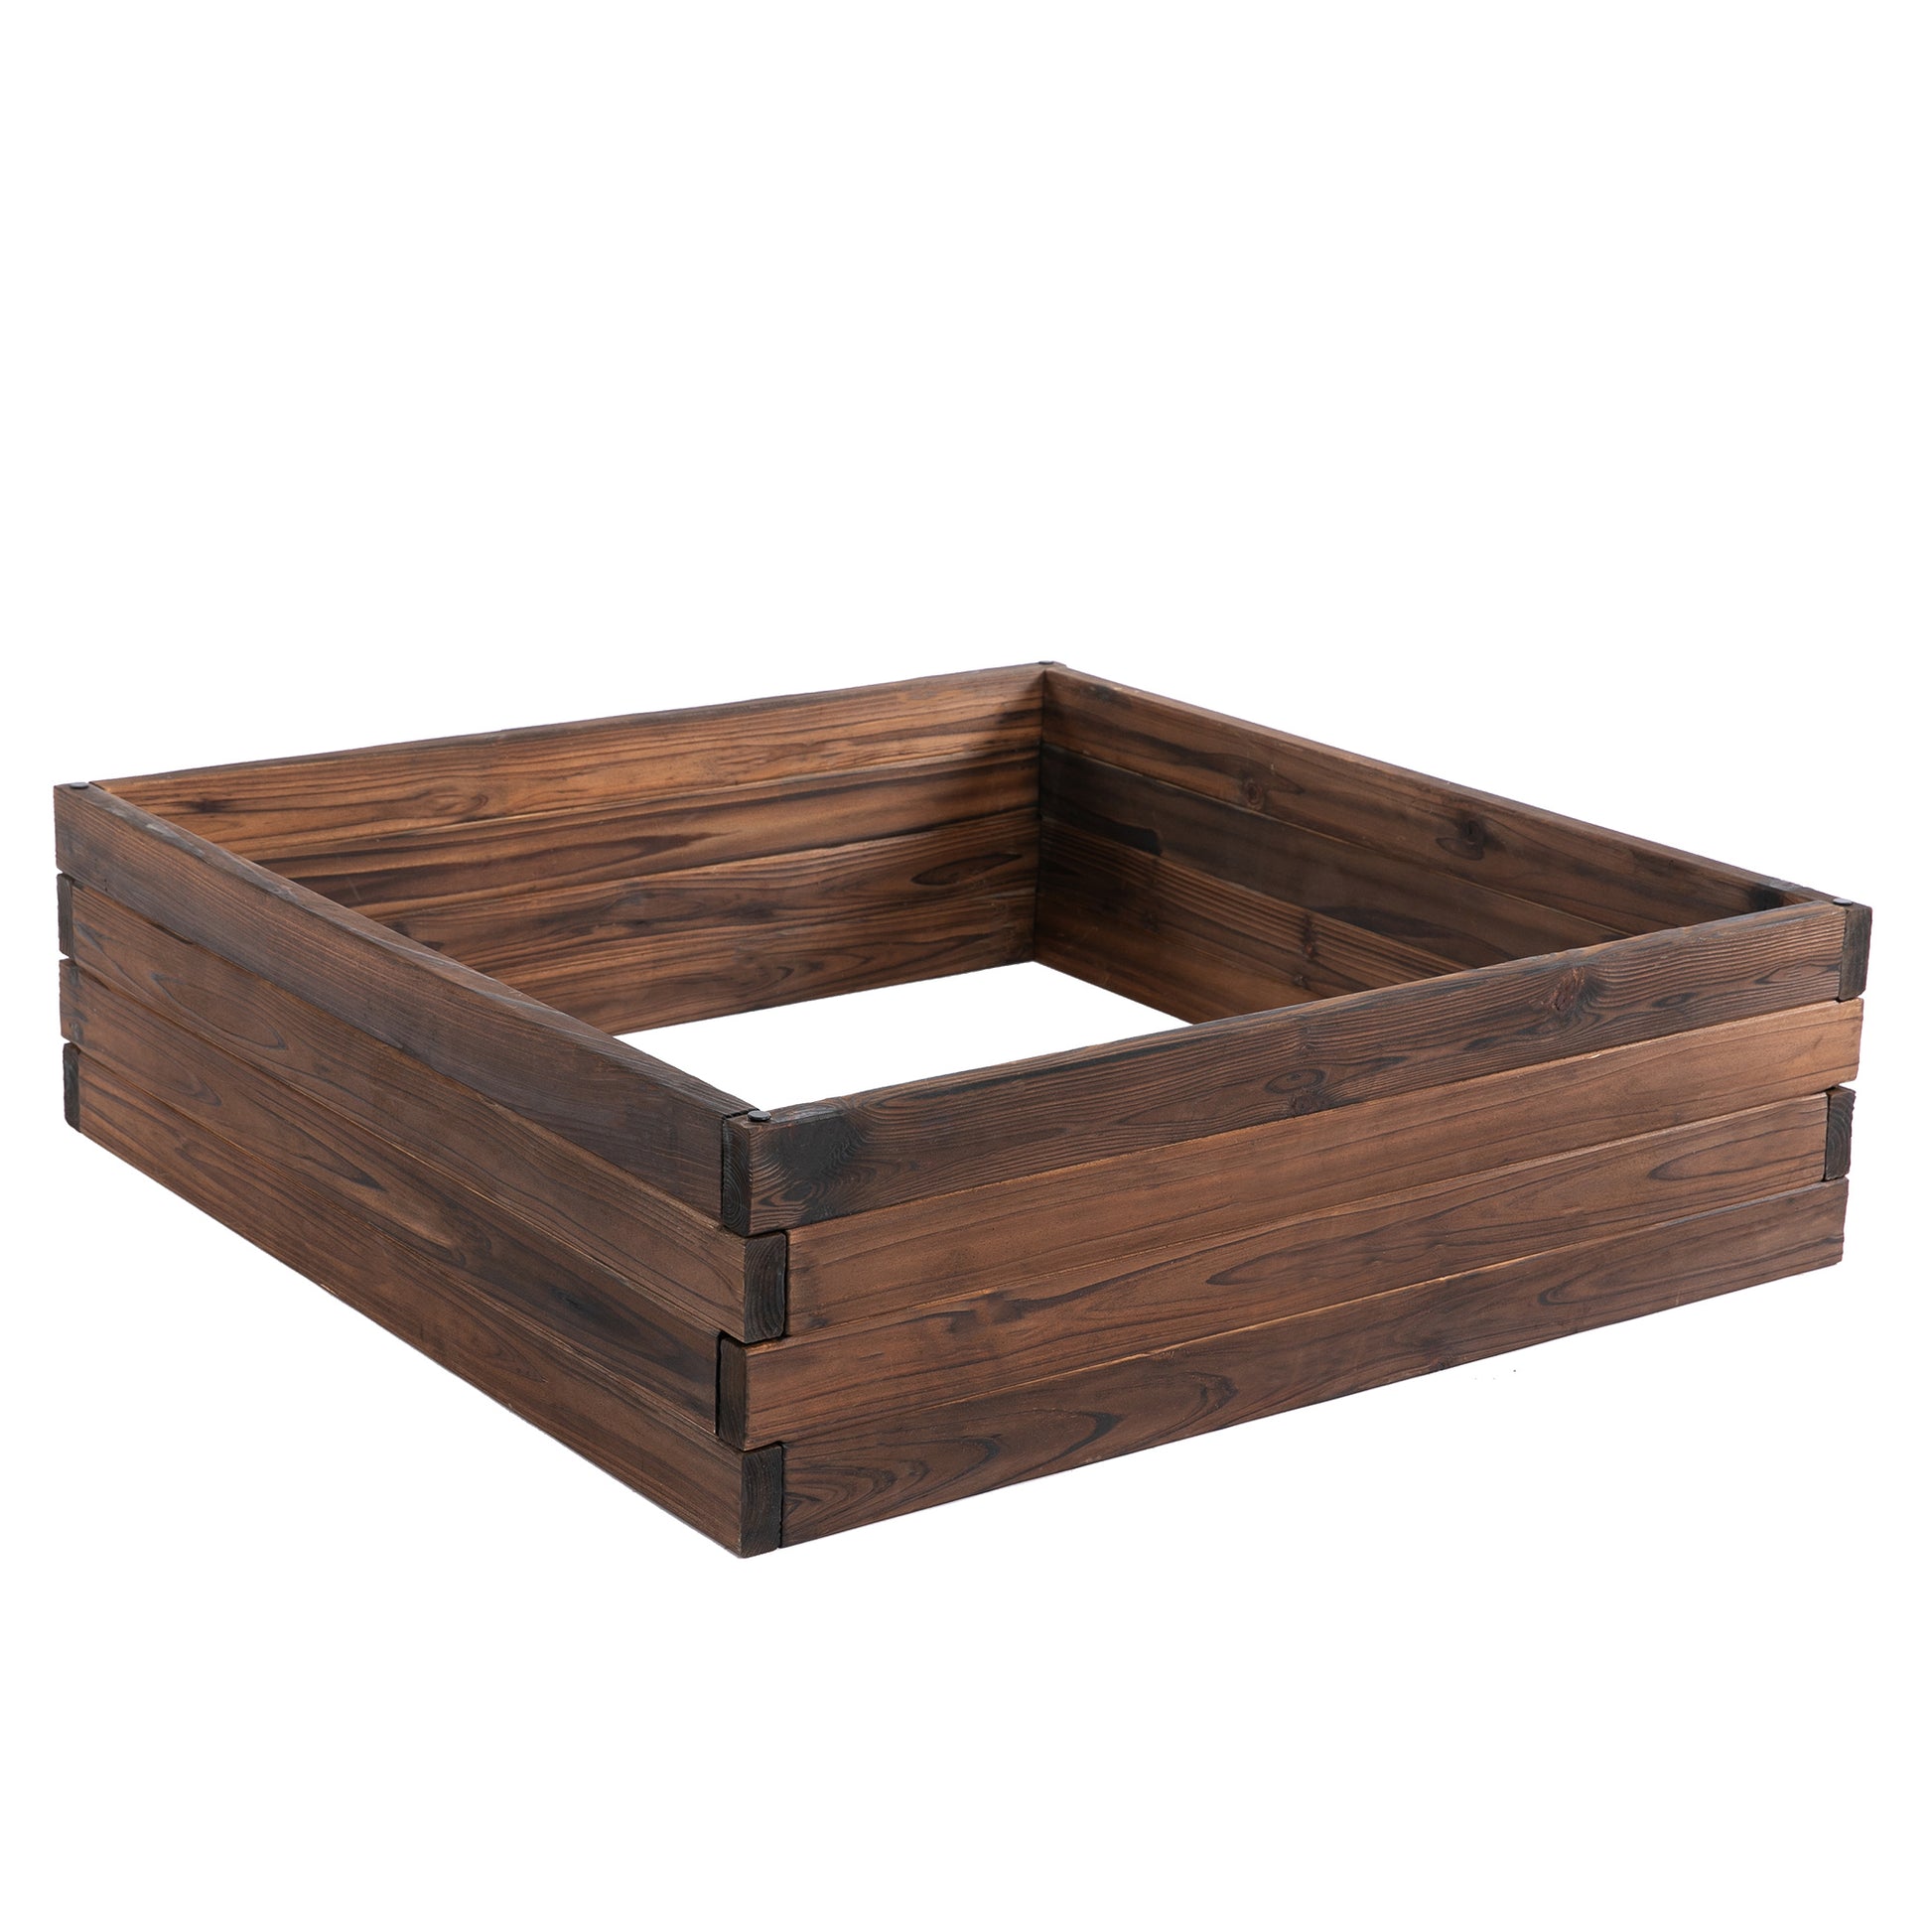 Plant Stand, Outdoor Plant Stand, Wooden Planter Box, 80L x 80W x 22.5H cm, Brown, Outsunny, 8